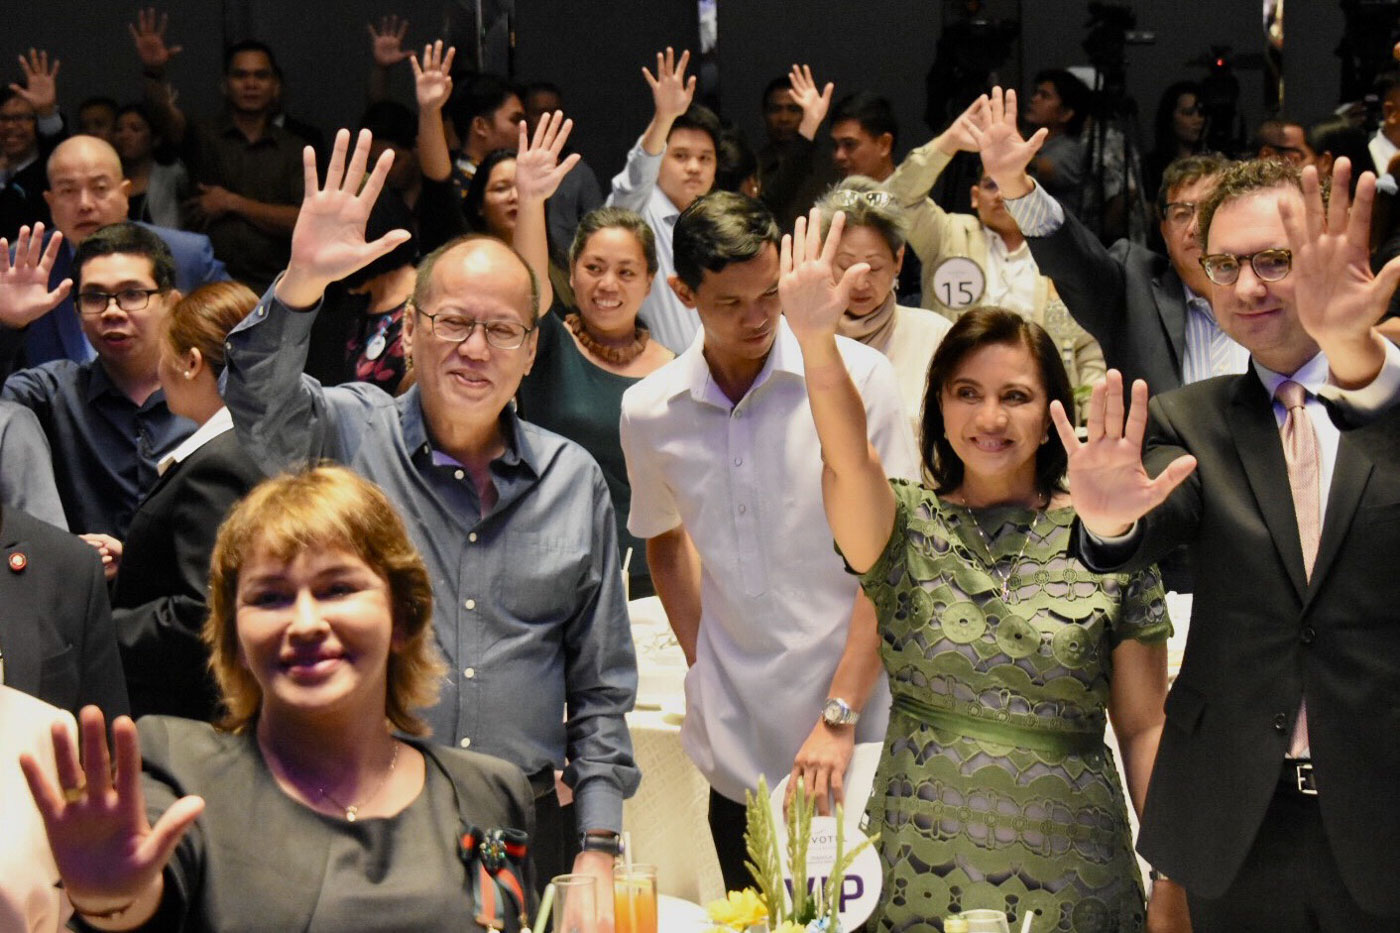 PARTY MATES. Former president Benigno Aquino III and Vice President Leni Robredo are present during the awarding of De Lima's Prize for Freedom. Photo by Angie de Silva/Rappler  